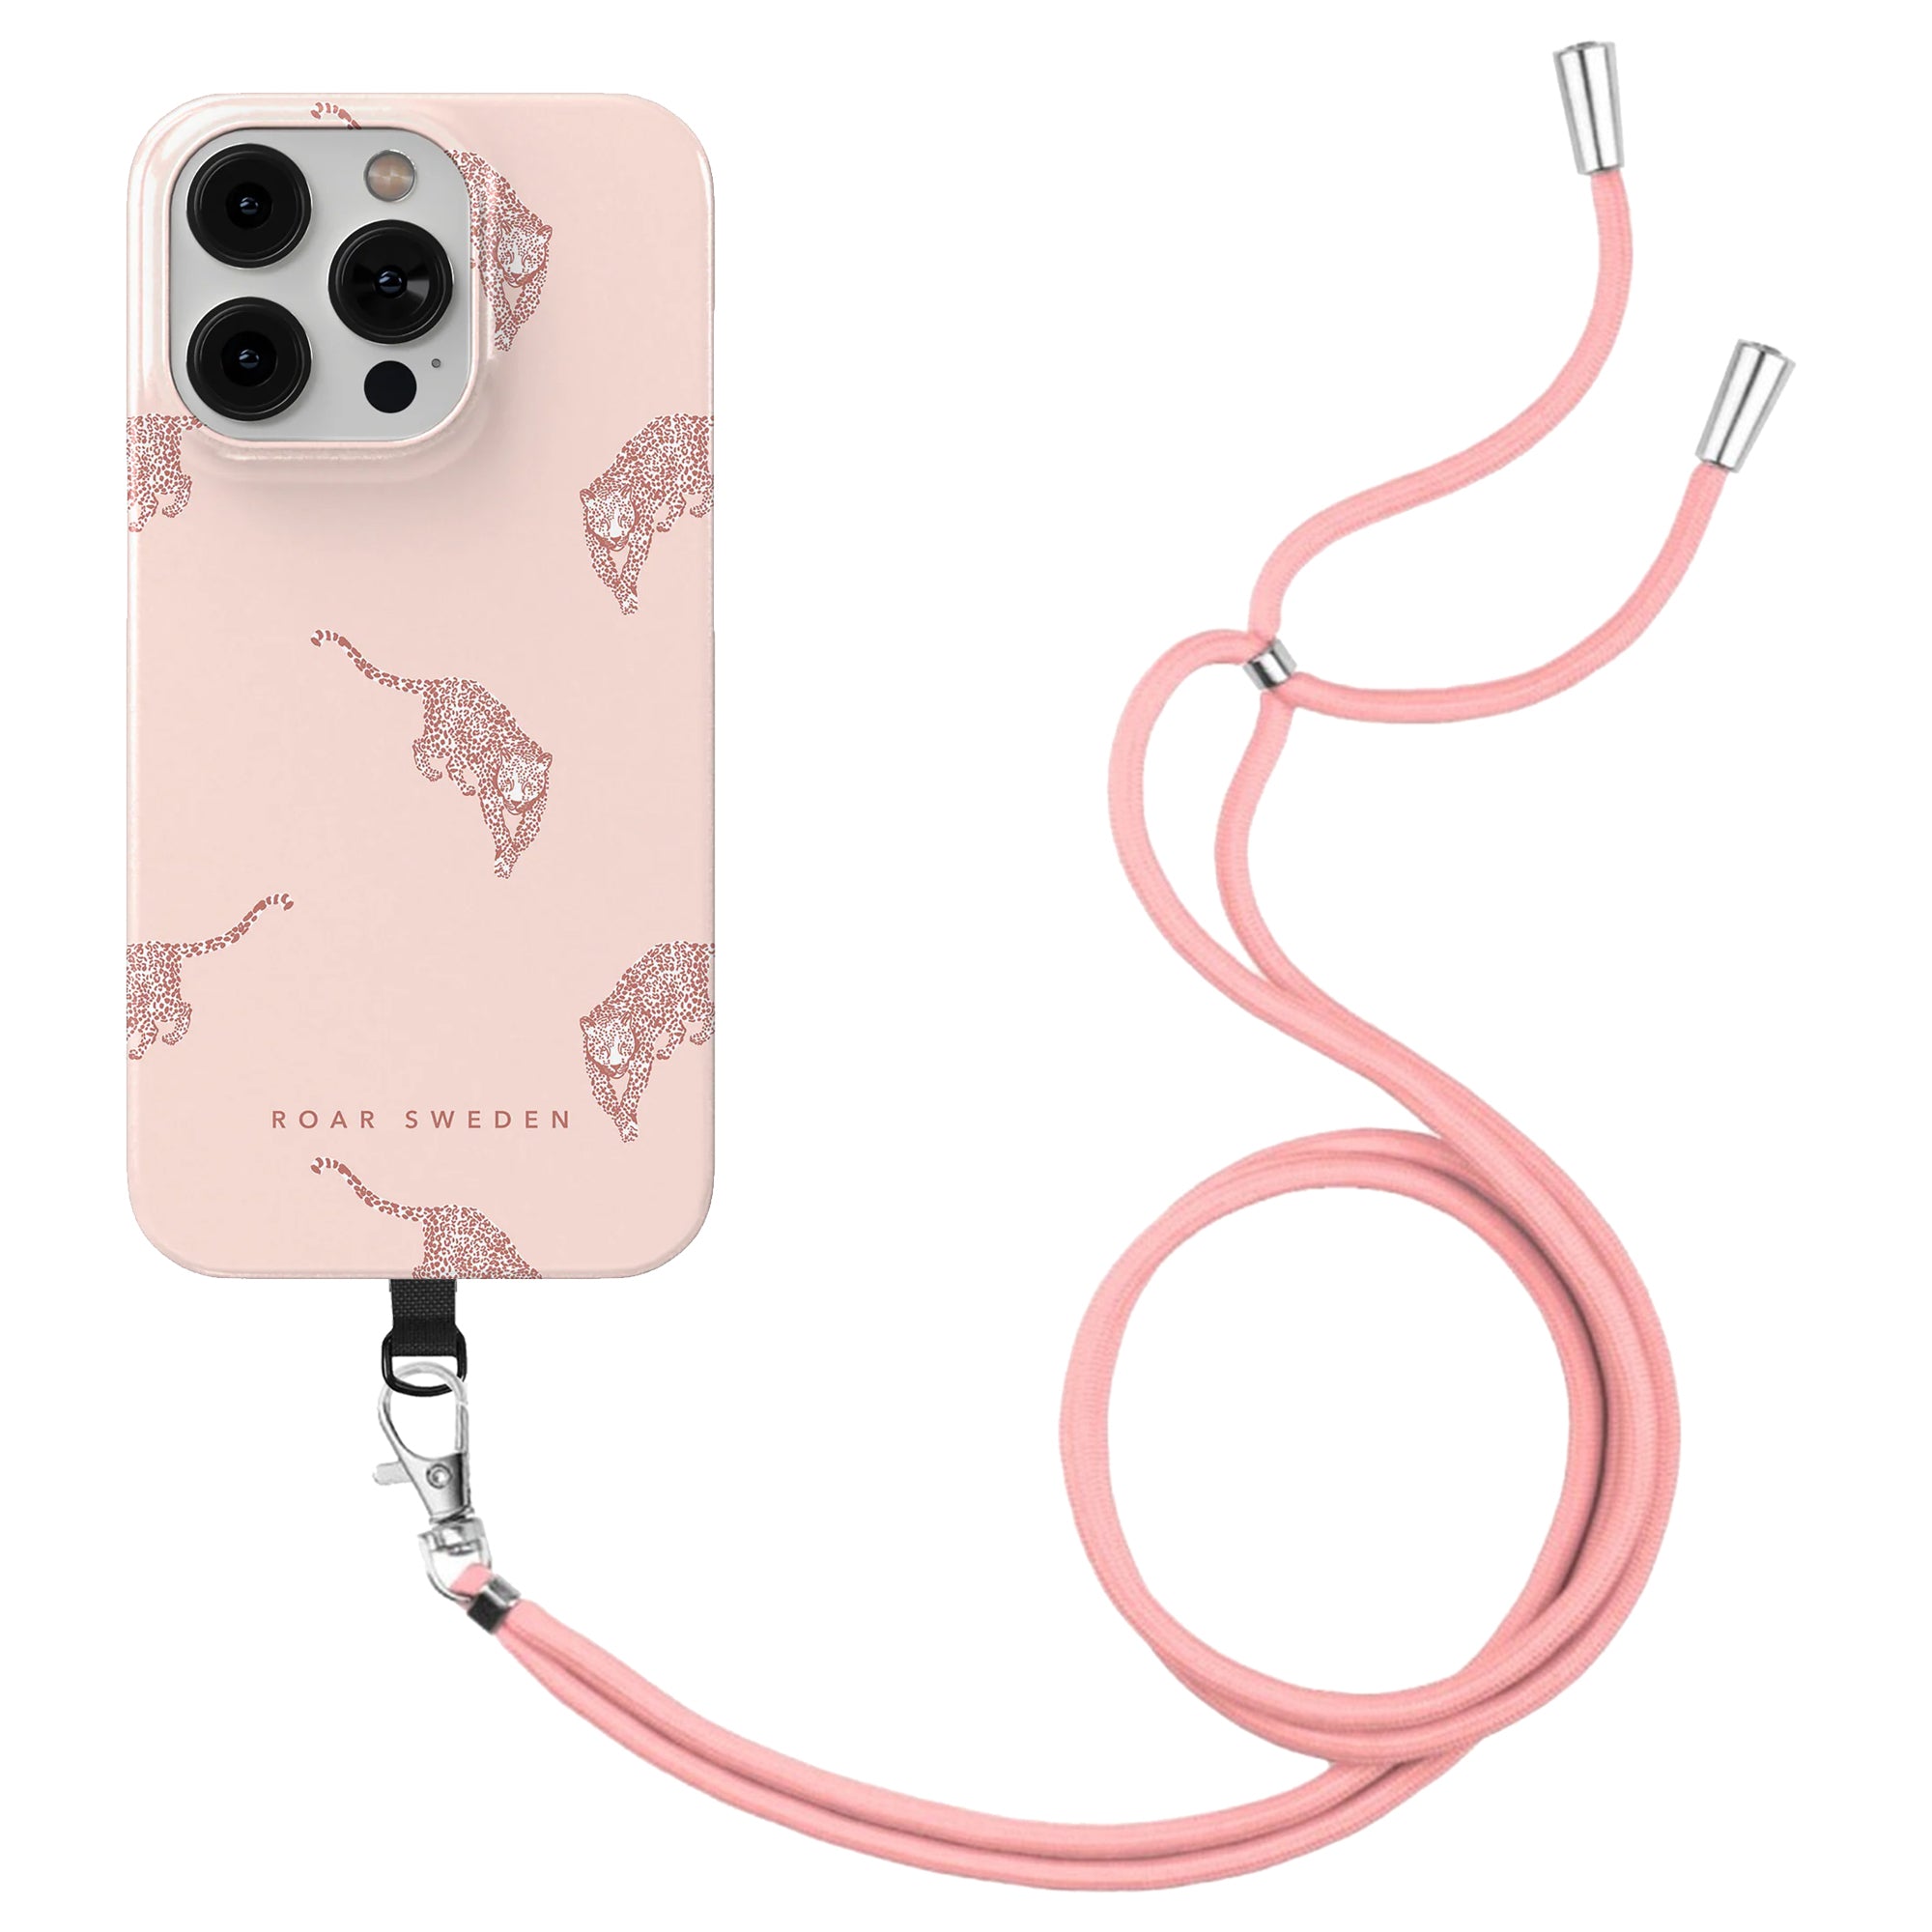 A pink phone case with leopard prints and the text "ROAR SWEDEN," attached to a matching pink, Mobilhalsband för mobilskal - Rosa.